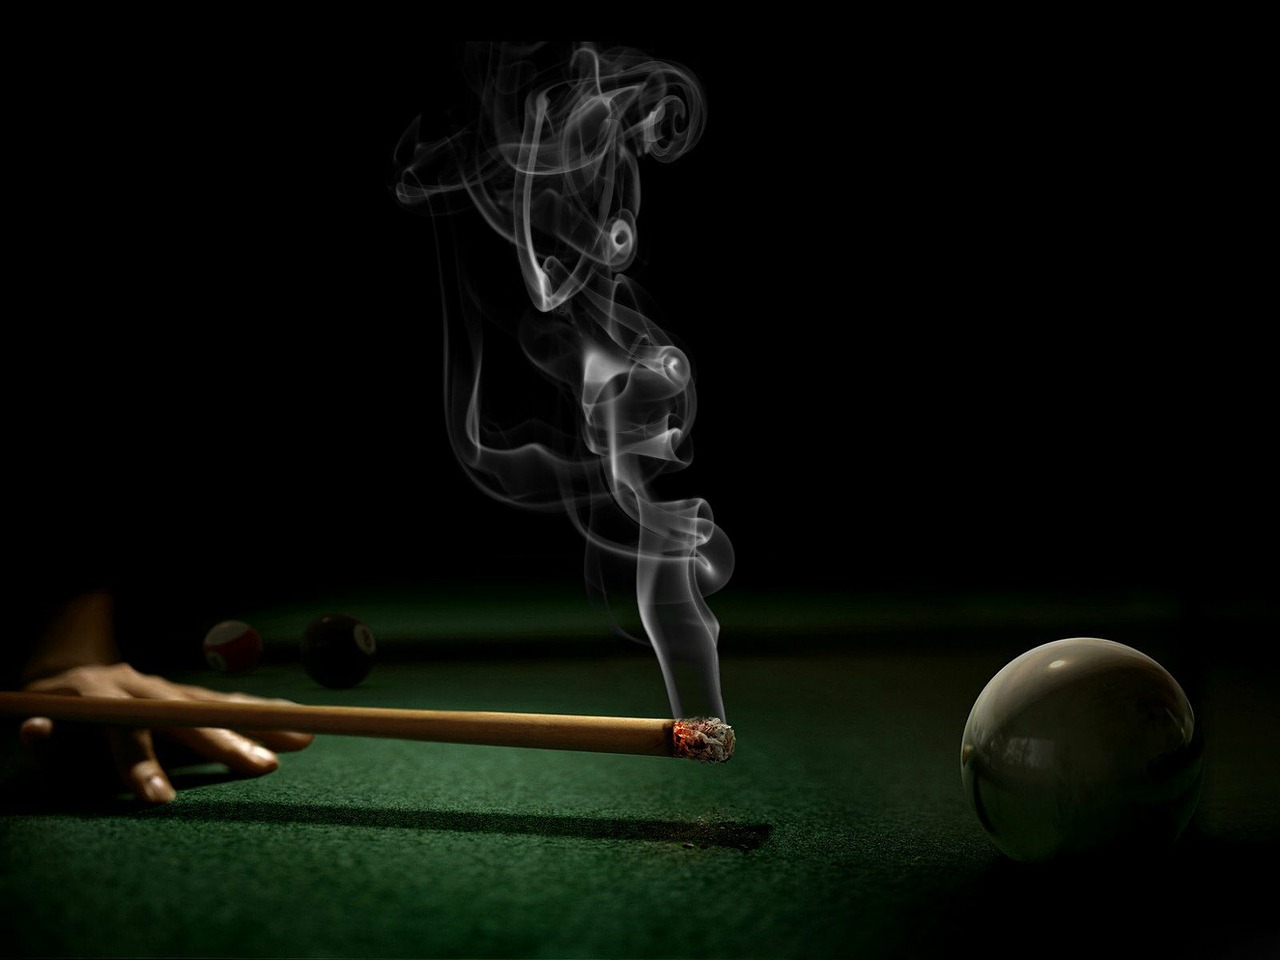 at,billiards,with,cigarette,free pictures, free photos, free images, royalty free, free illustrations, public domain